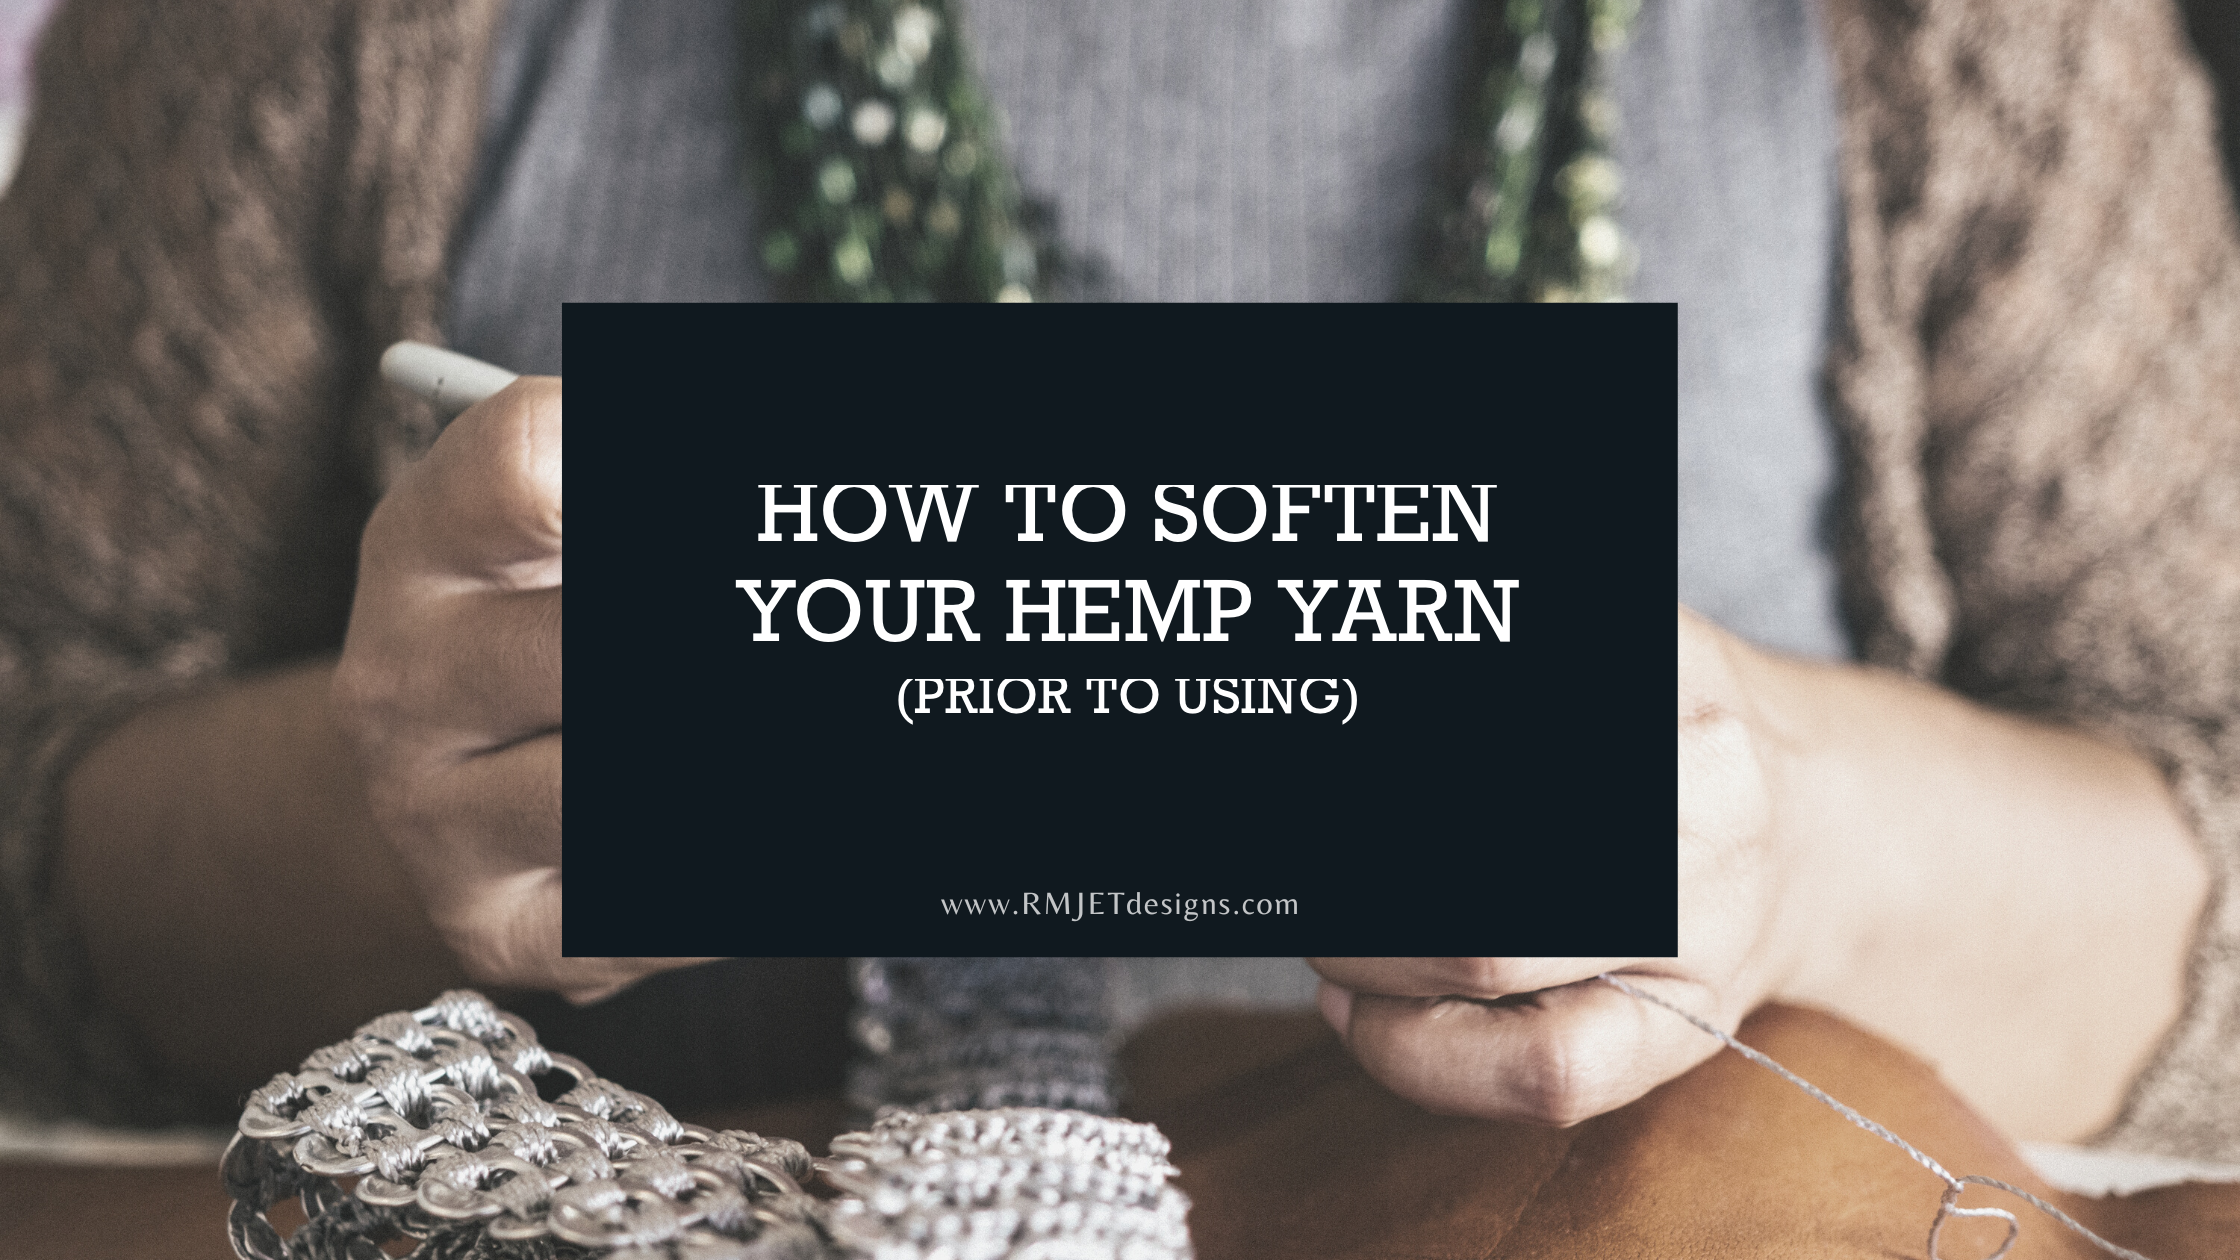 How to soften your hemp yarn prior to using by RMJETdesigns